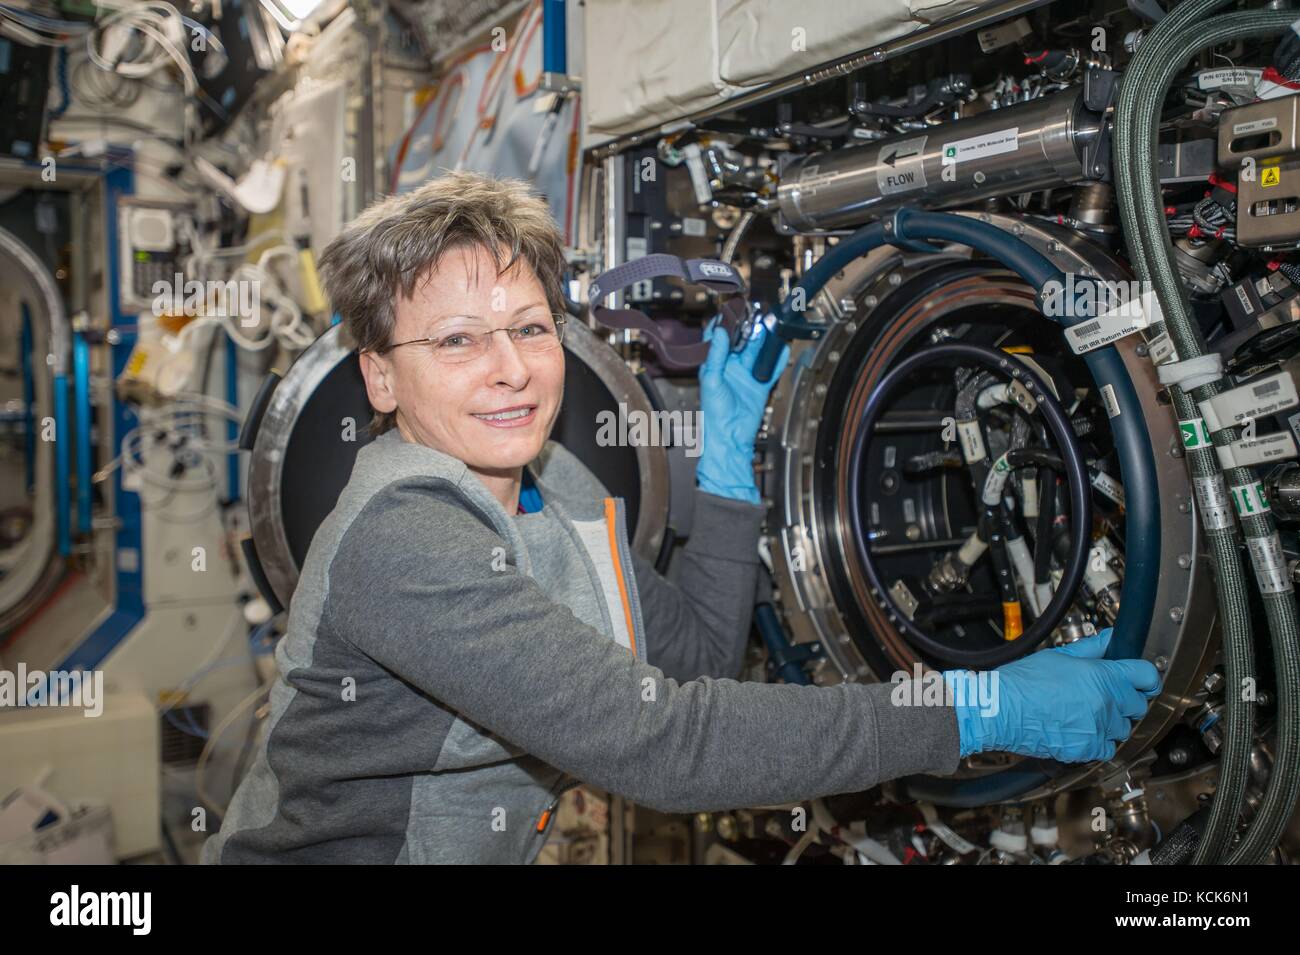 NASA International Space Station Expedition 51 prime crew member American astronaut Peggy Whitson works on an experiment in the U.S. Destiny Laboratory Module August 4, 2017 in Earth orbit.  (photo by NASA Photo  via Planetpix) Stock Photo